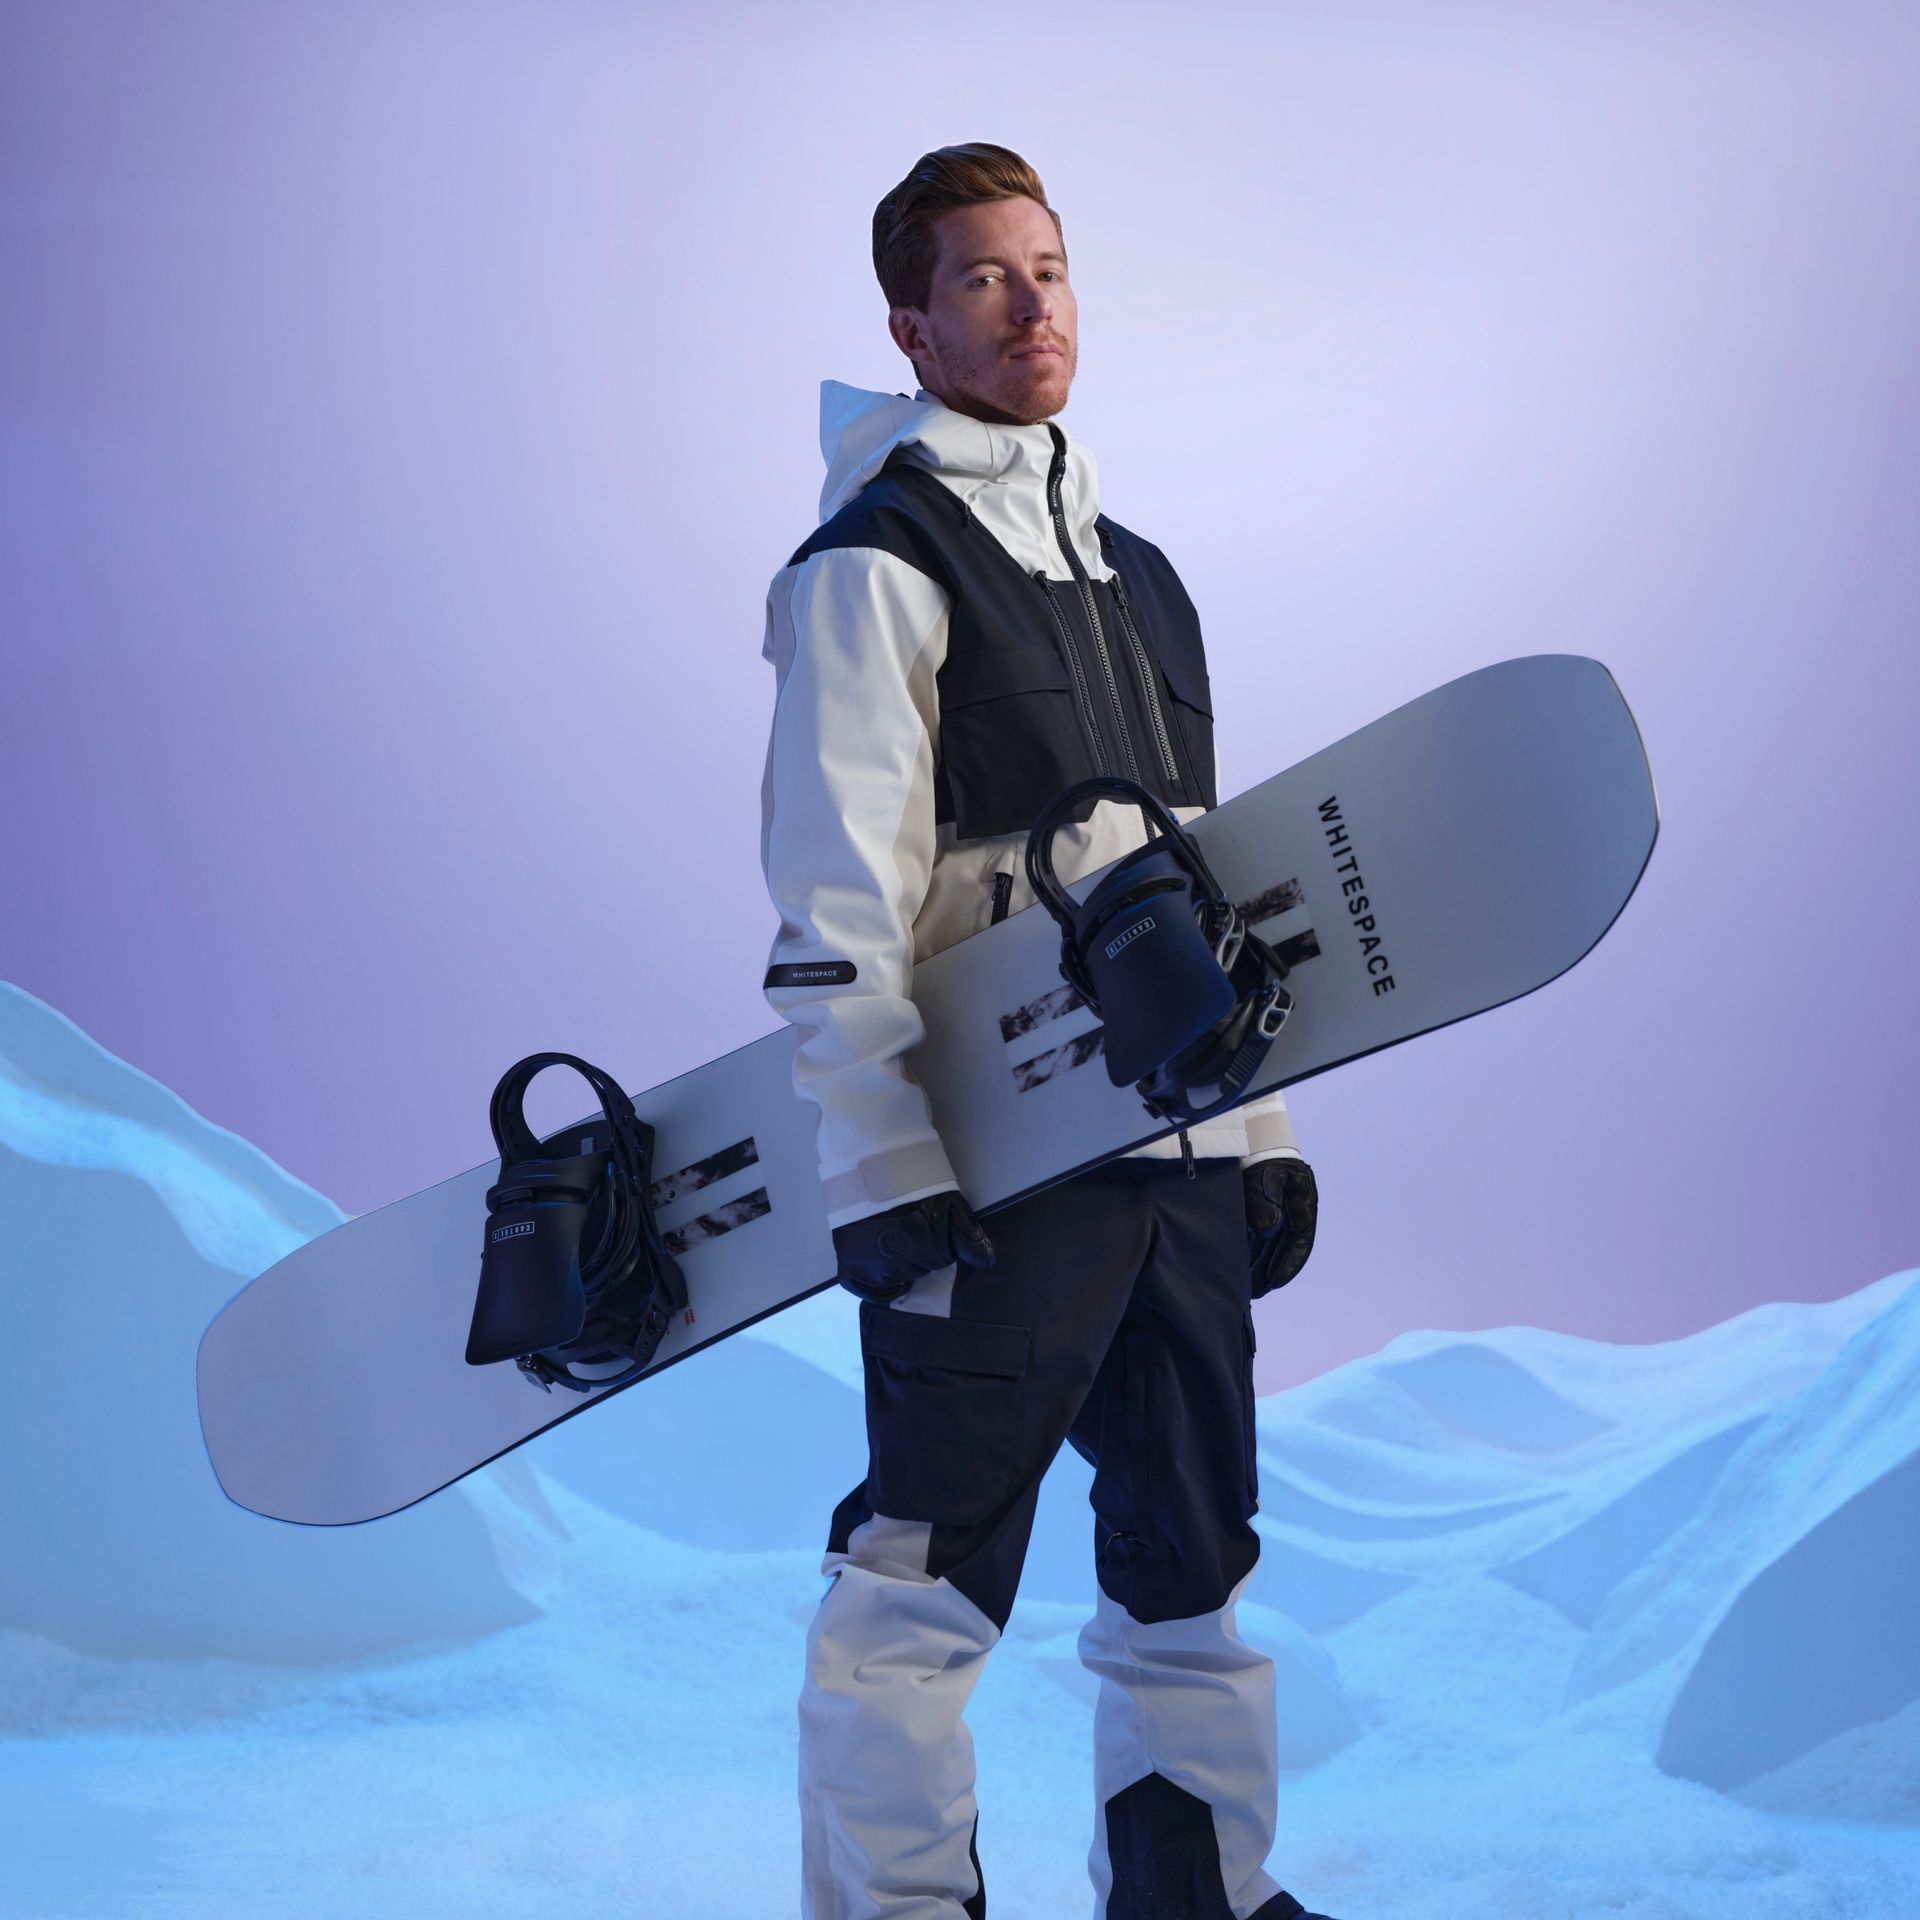 Whitespace :What Do You Think About Shaun Whites Snowboard Brand